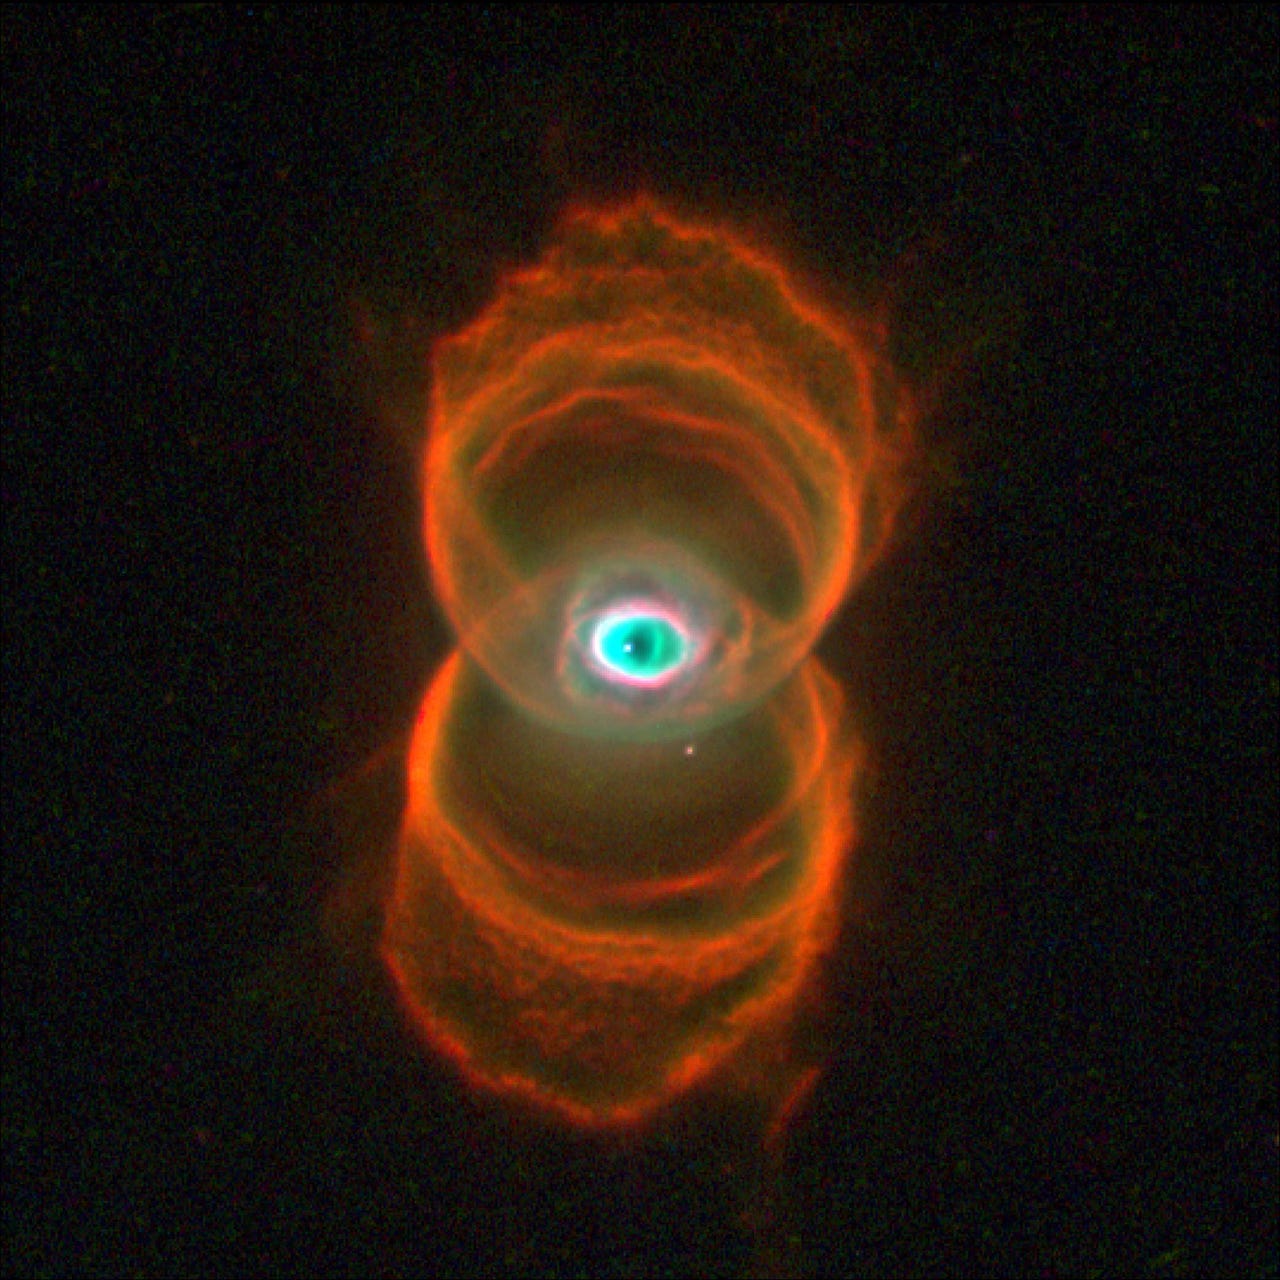 Two sets of rings in orange and gold stacked one above the other form the shape of a hourglass. At image center, where the two sets of rings overlap, is an area of white, green and black dust in a shape that is similar to the human eye.